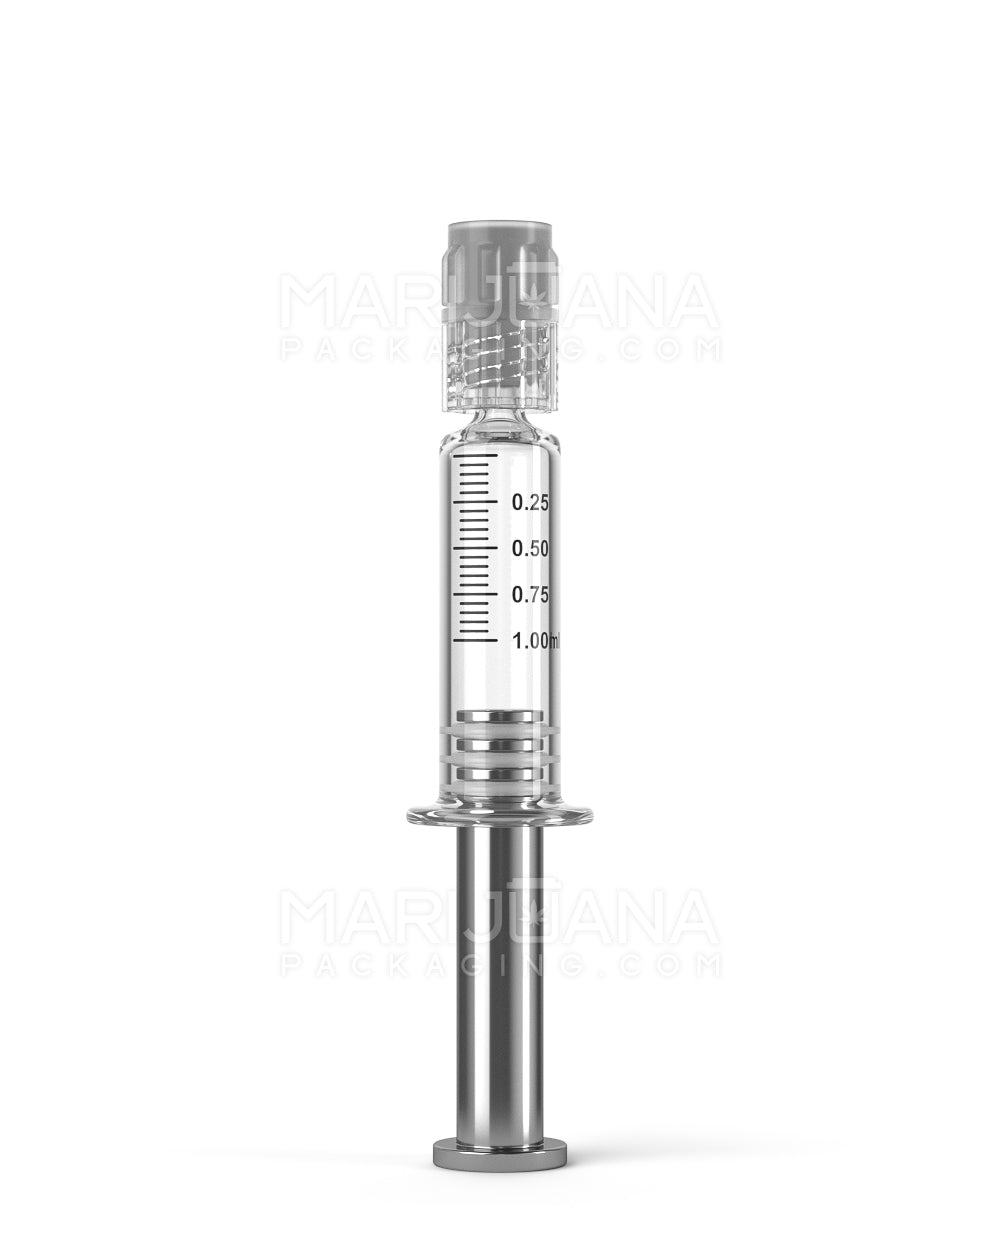 Luer Lock | Glass Dab Applicator Syringes w/ Metal Plunger | 1mL - 0.25mL Increments | Sample - 1